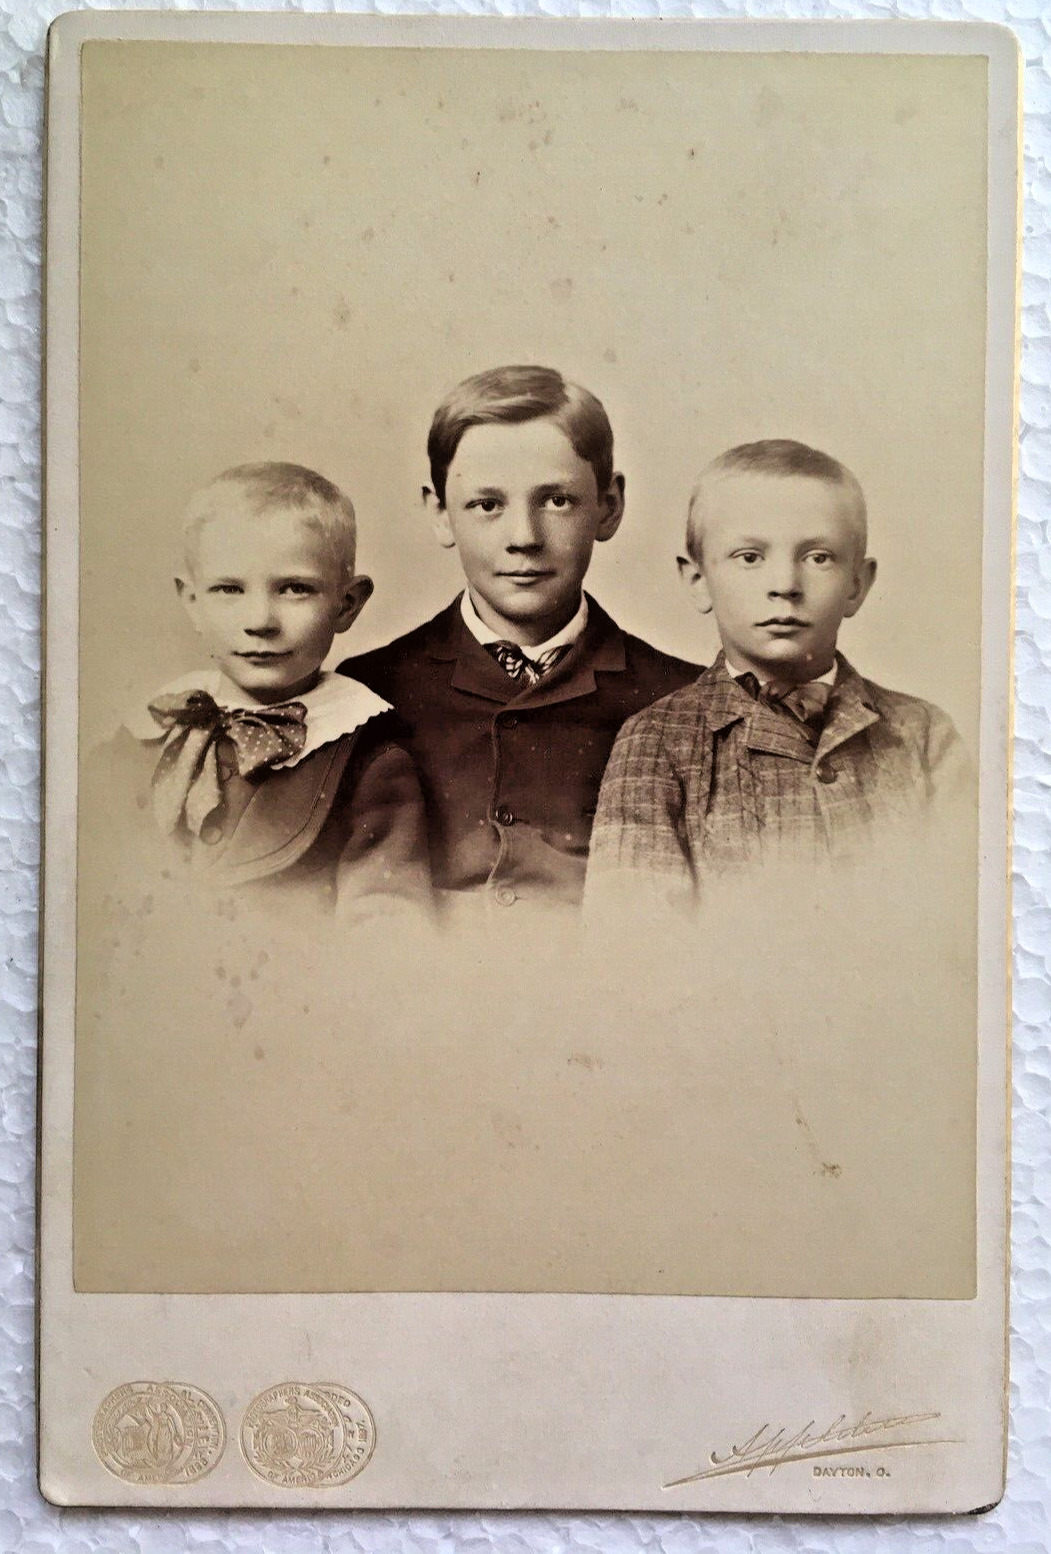 Antique Cabinet Card 3 Young Boys Children Portrait Brothers Dayton Ohio